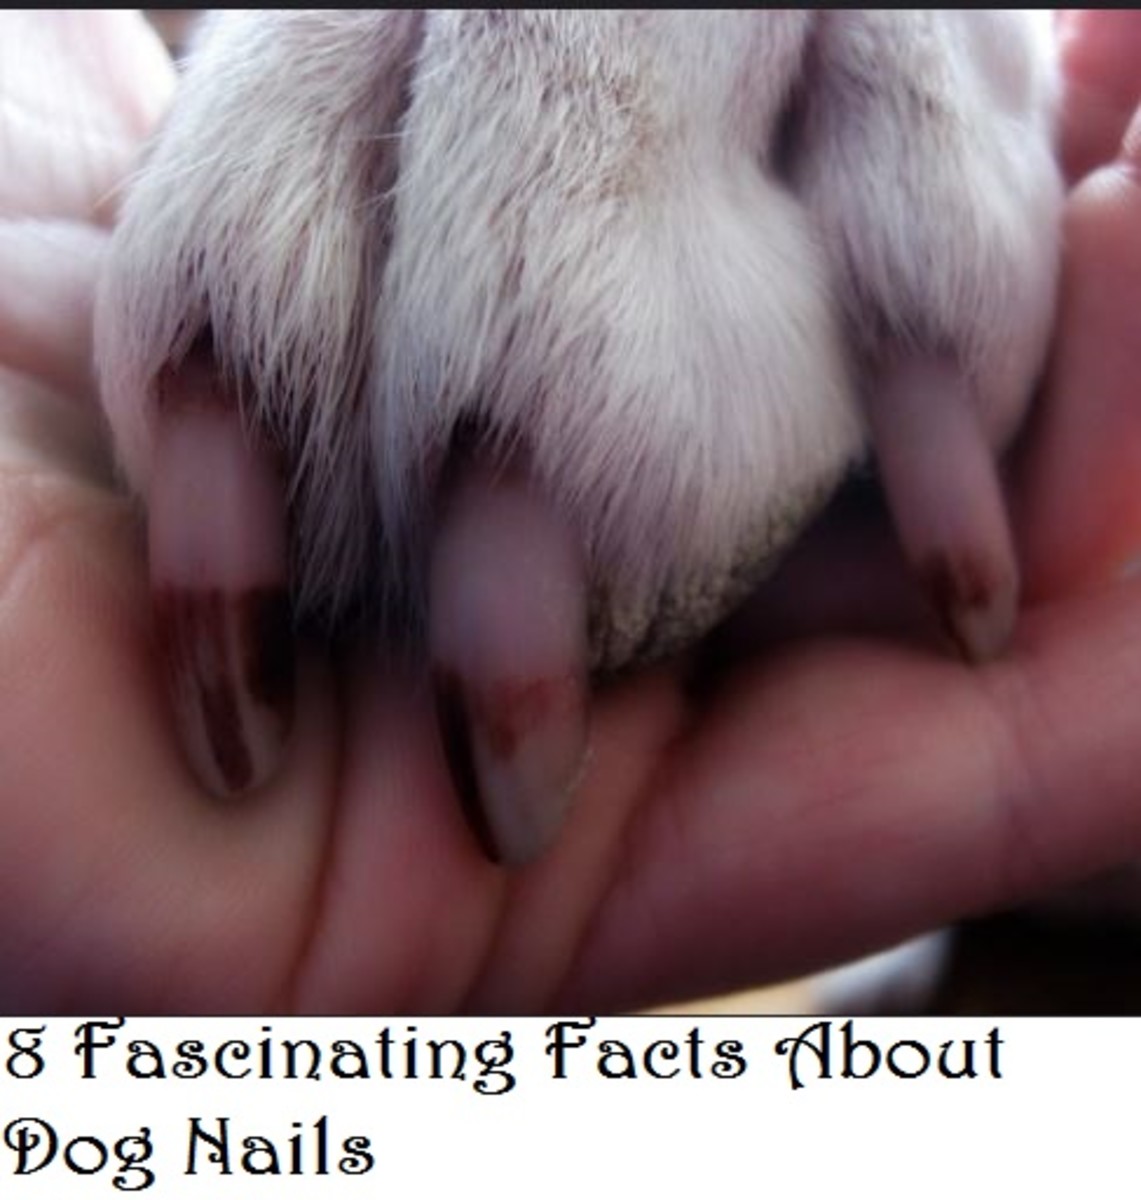 12 Interesting Facts About Dog Nails - Dog Discoveries